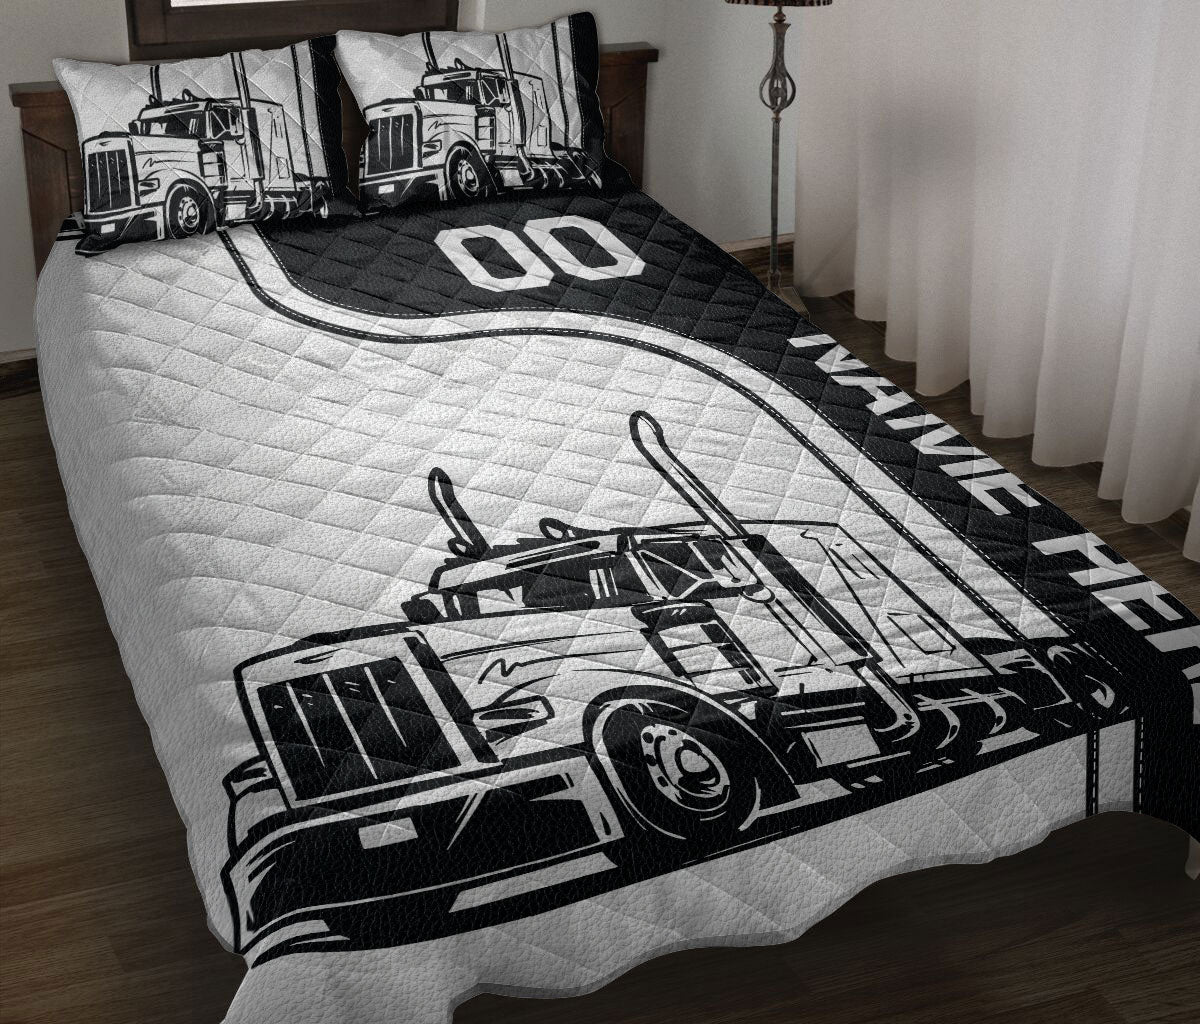 Ohaprints-Quilt-Bed-Set-Pillowcase-Truck-Sport-Black-And-White-Trucker-Gift-Custom-Personalized-Name-Blanket-Bedspread-Bedding-3526-Throw (55'' x 60'')